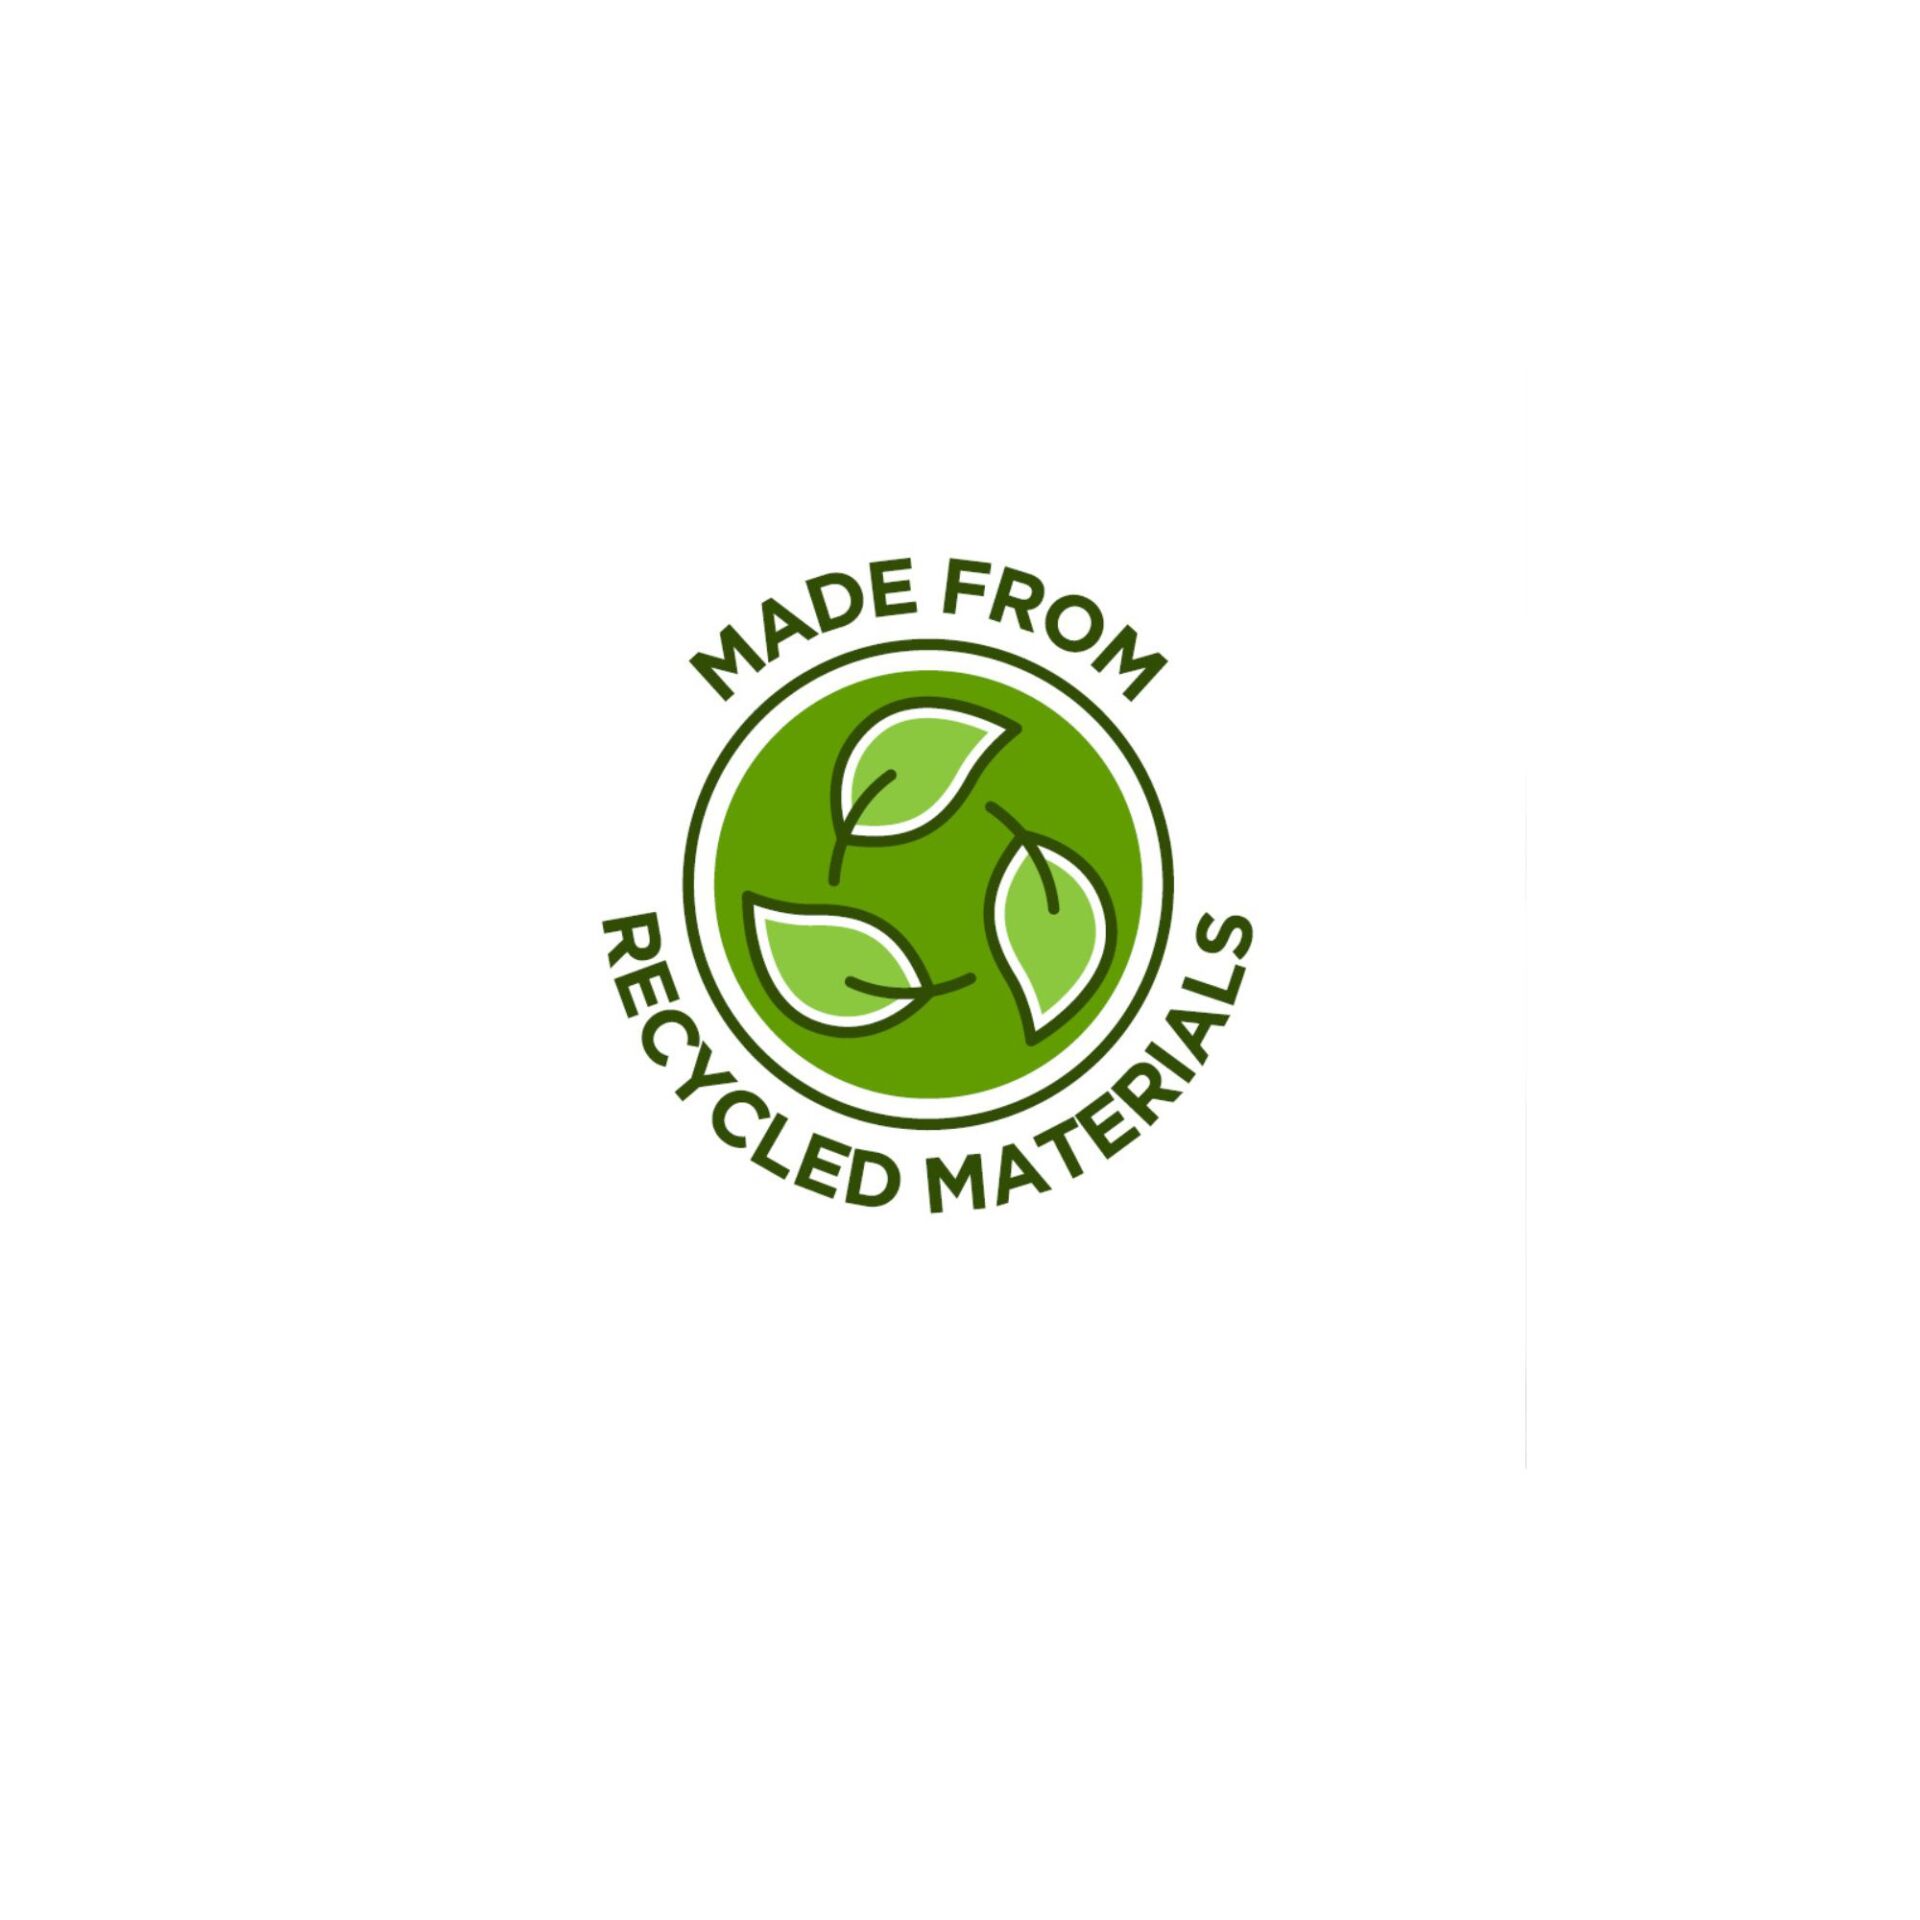 Logo recycled materials